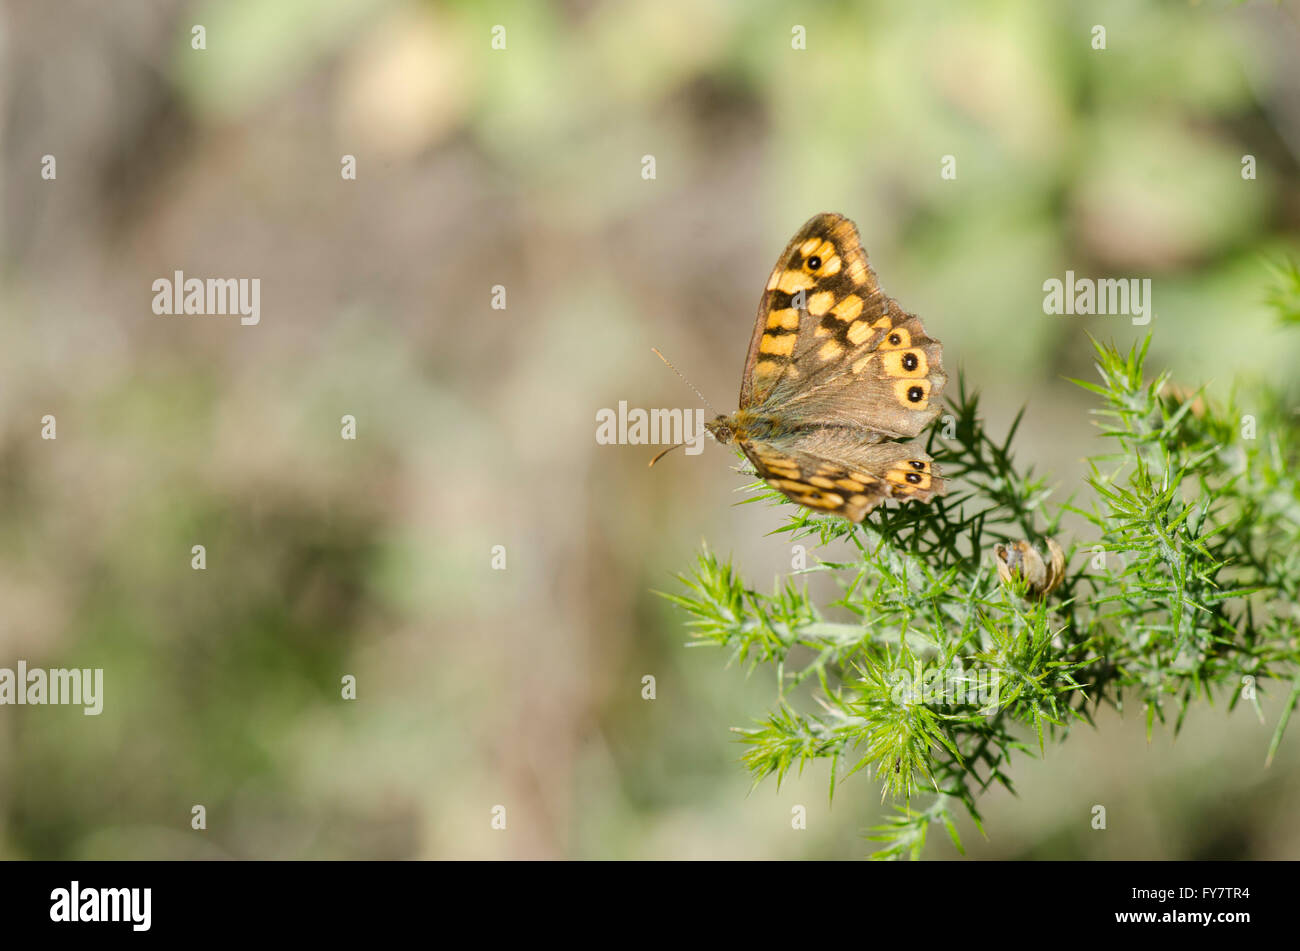 Speckled wood, butterfly, Pararge aegeria, sunbathing, Andalusia, Spain. Stock Photo